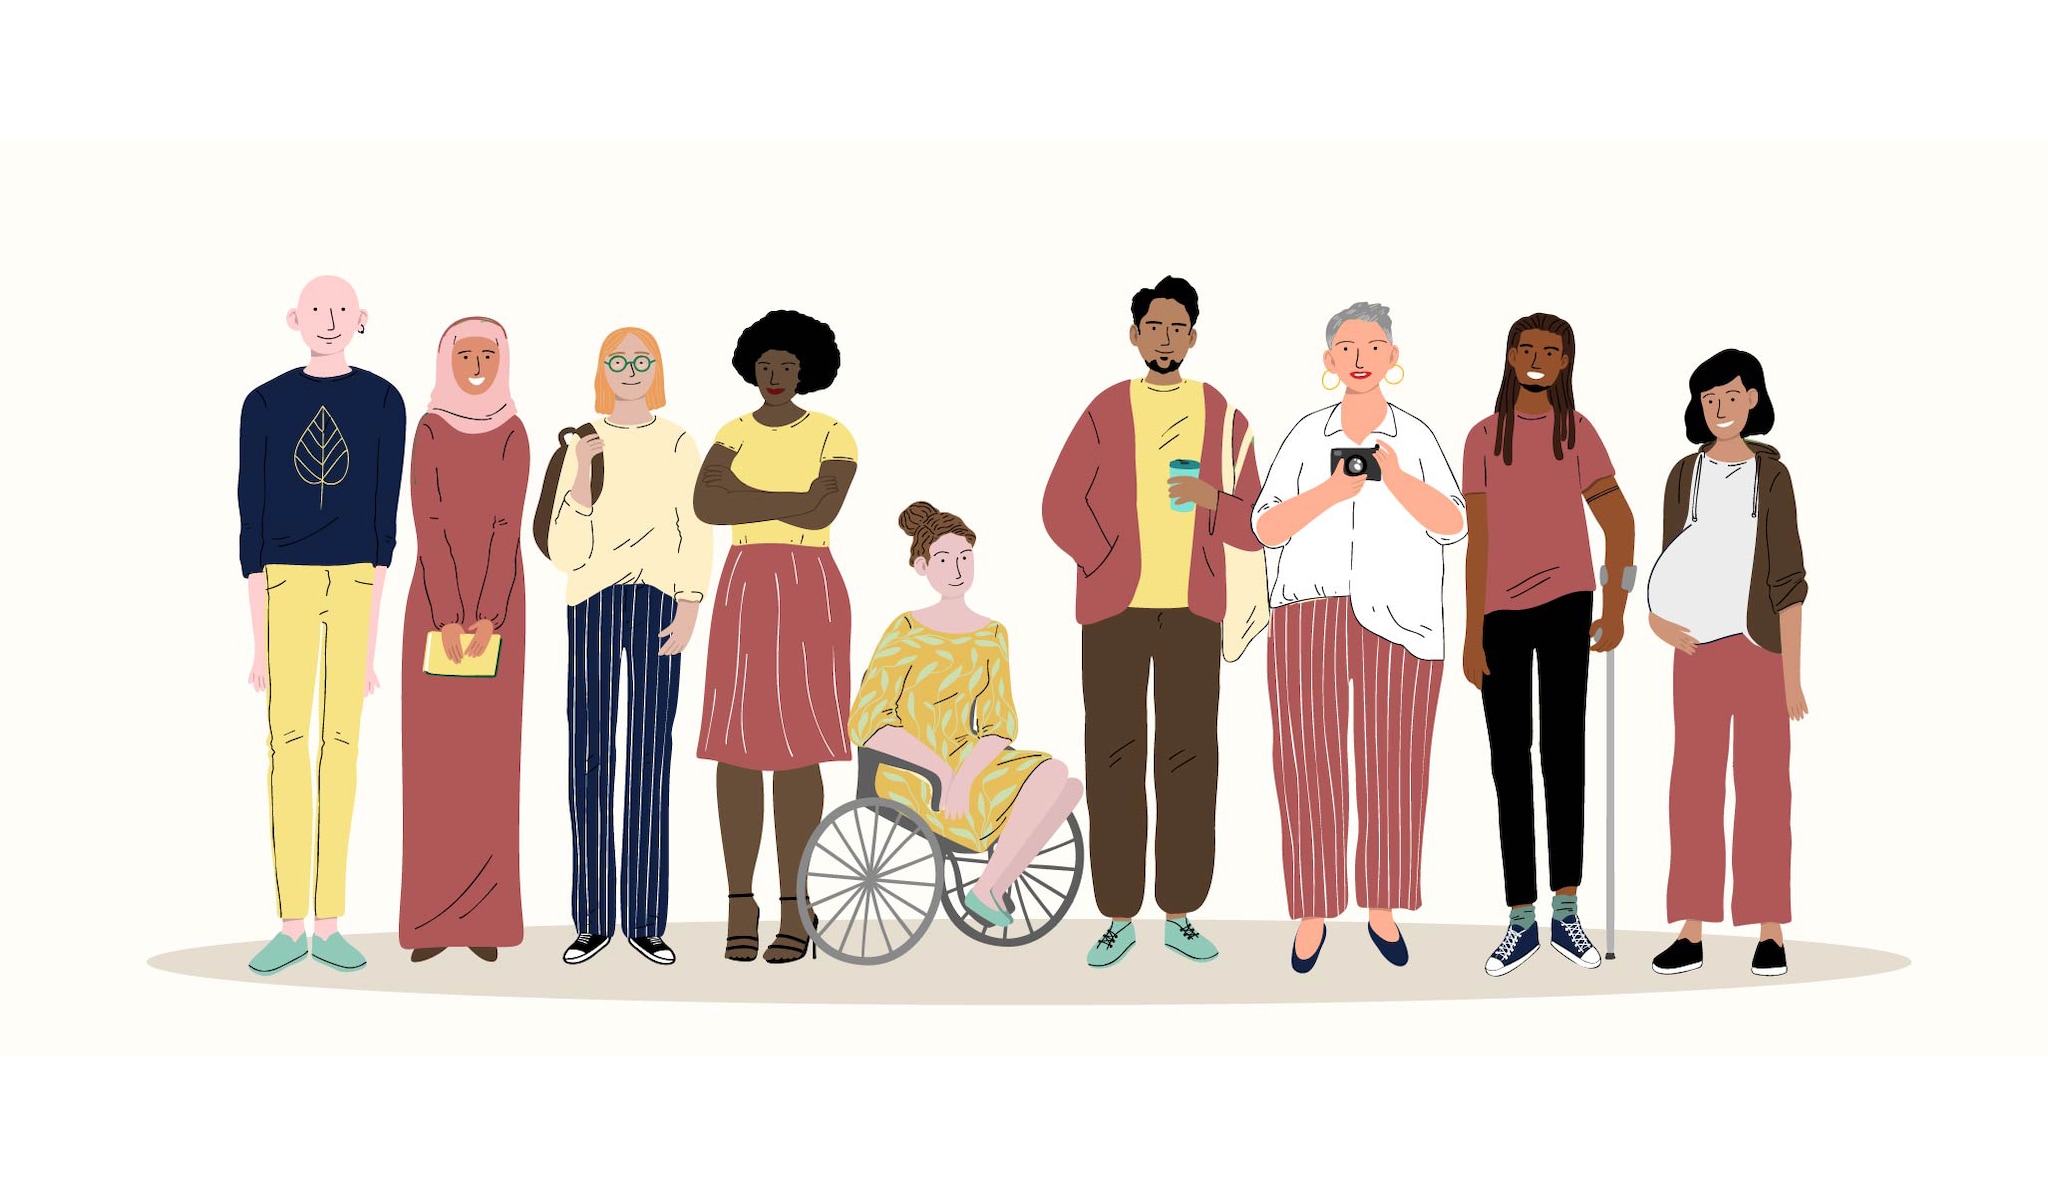 Illustration of diverse group of people.